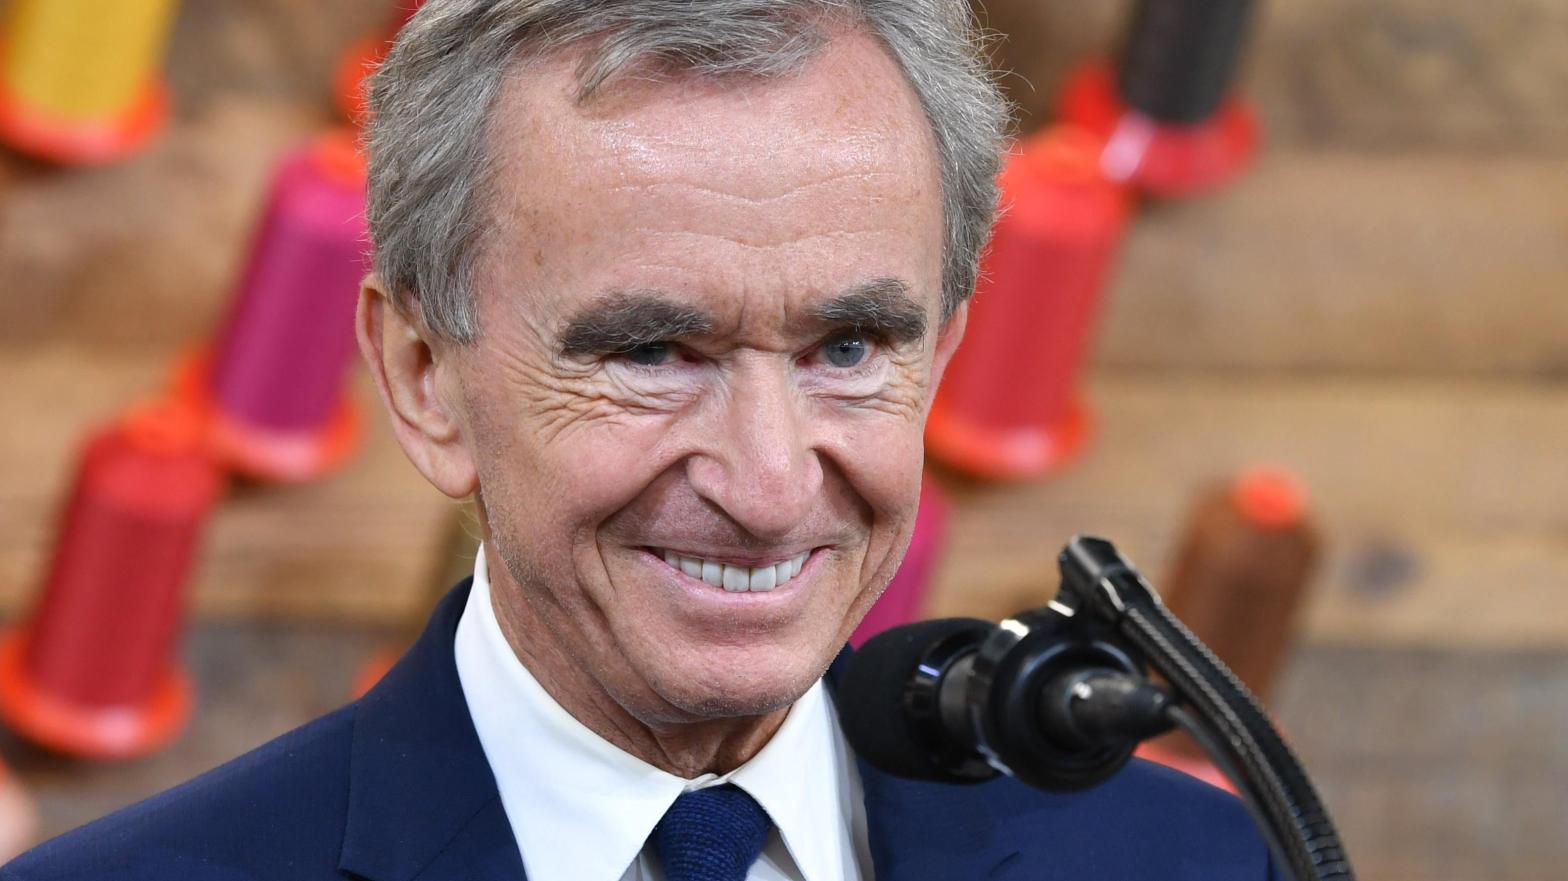 Bernard Arnault, as the world's second richest man, has become the main target for the campaign against needless private jet trips in France. (Photo: NICHOLAS KAMM/AFP, Getty Images)